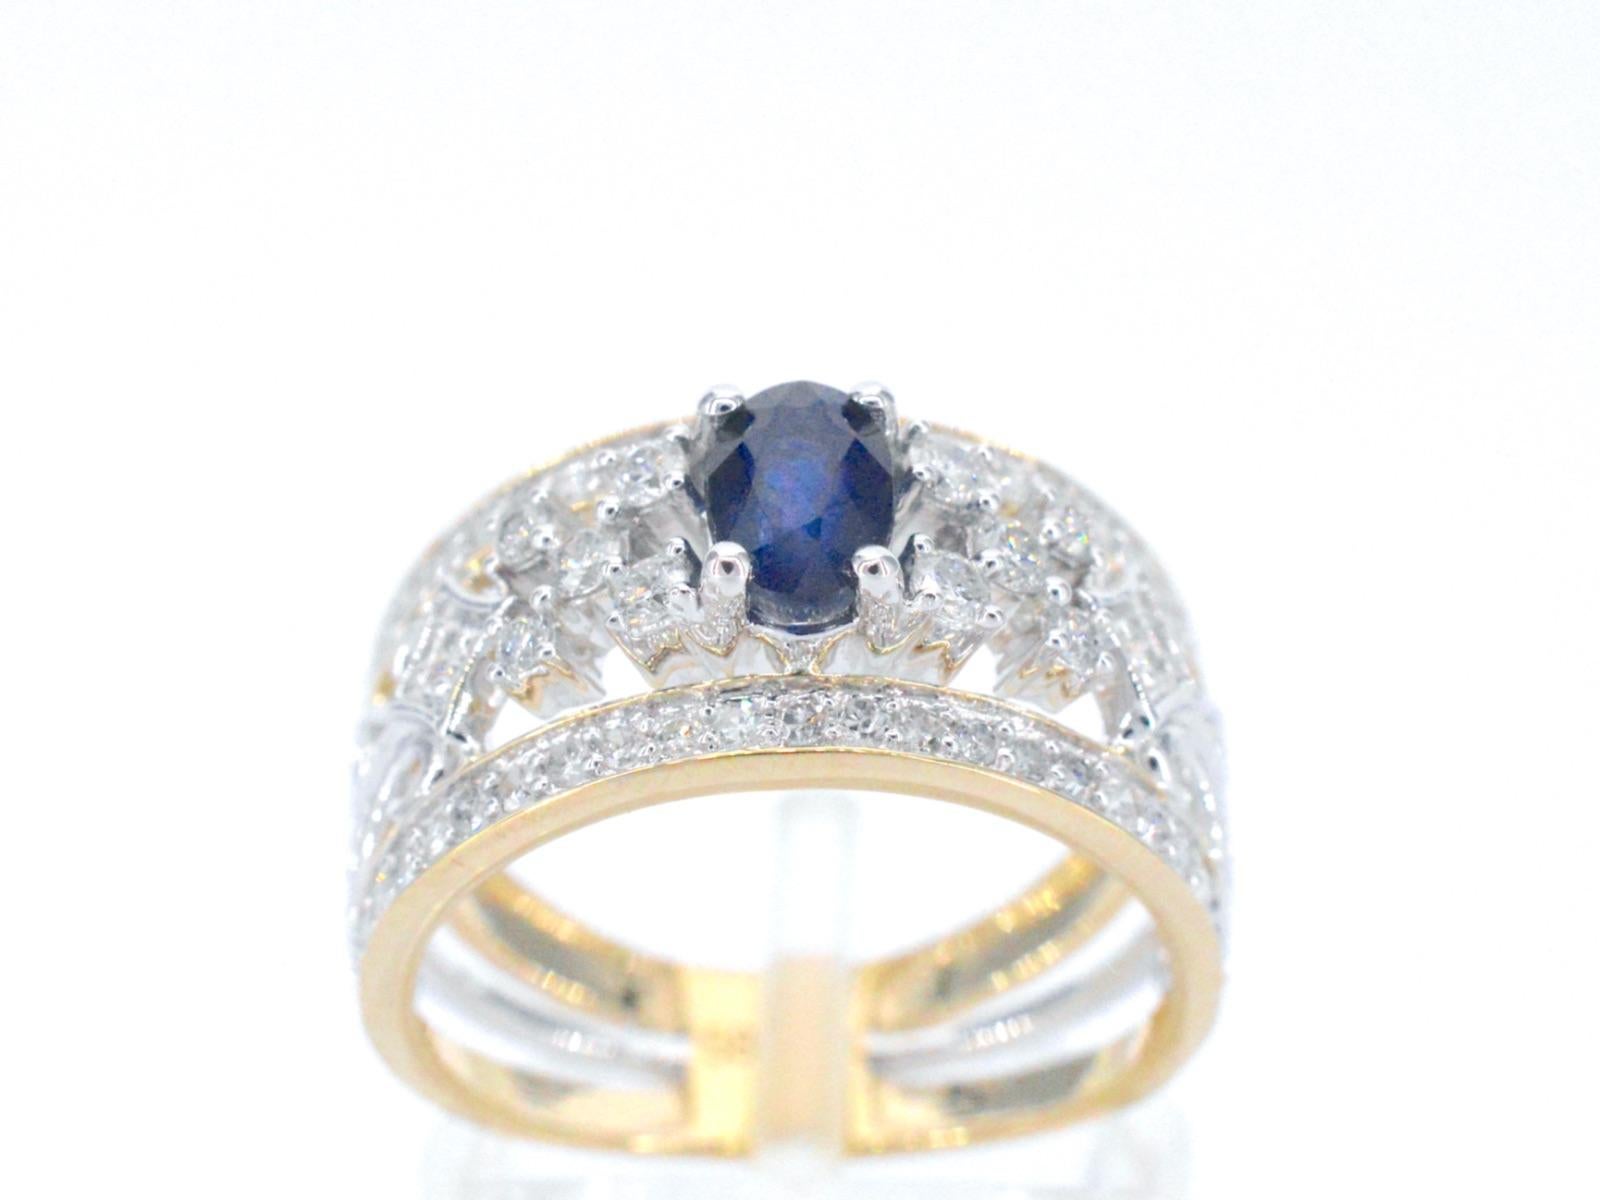 This exclusive gold ring is a stunning piece of jewelry that features dazzling diamonds and a beautiful sapphire. The diamonds are expertly set in the gold band to create a seamless and elegant look that is sure to catch the eye. The sapphire adds a